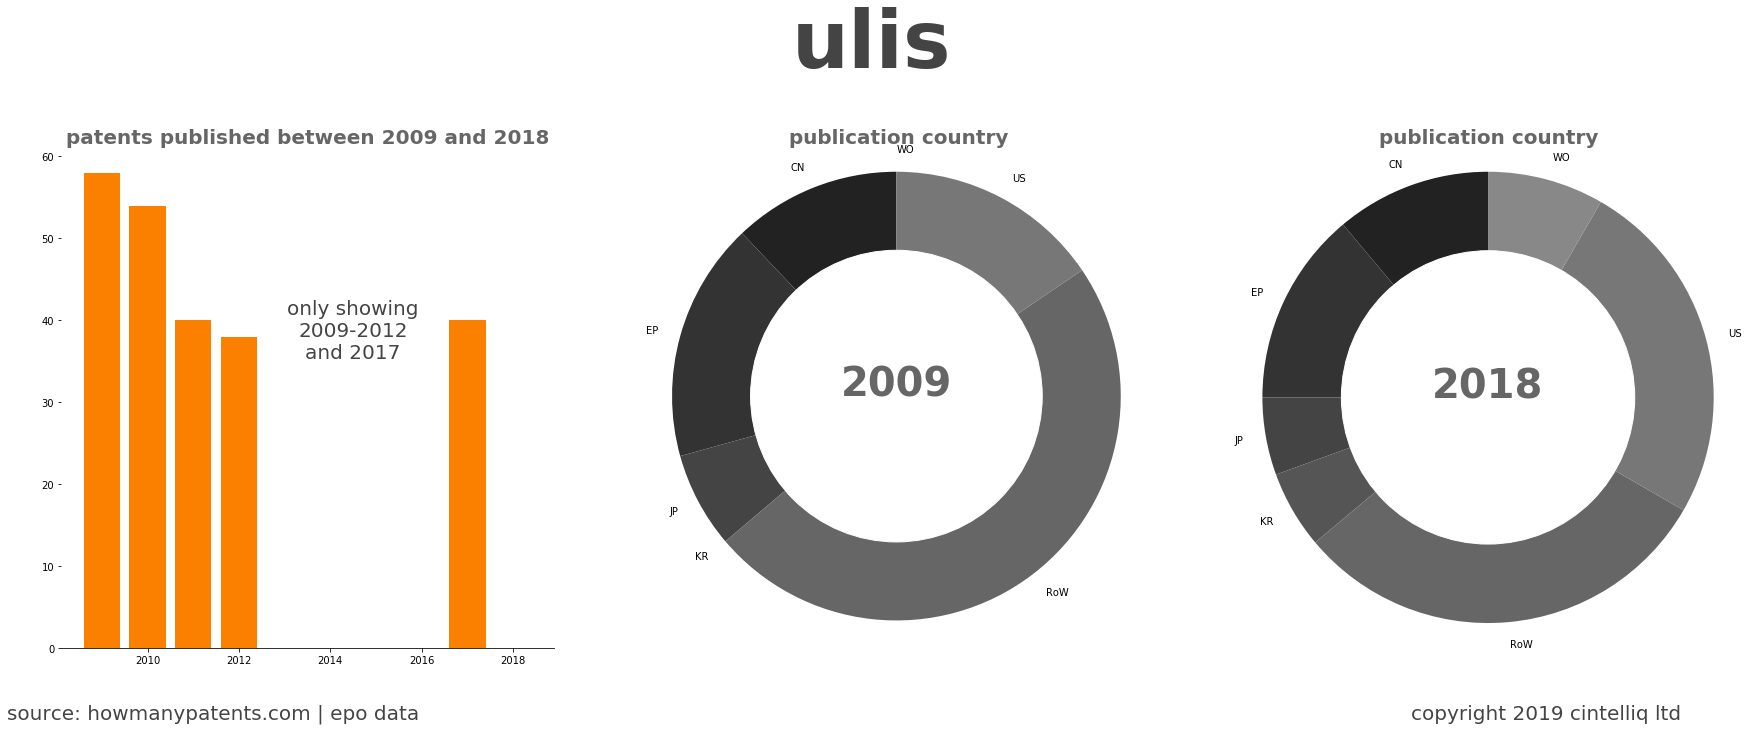 summary of patents for Ulis